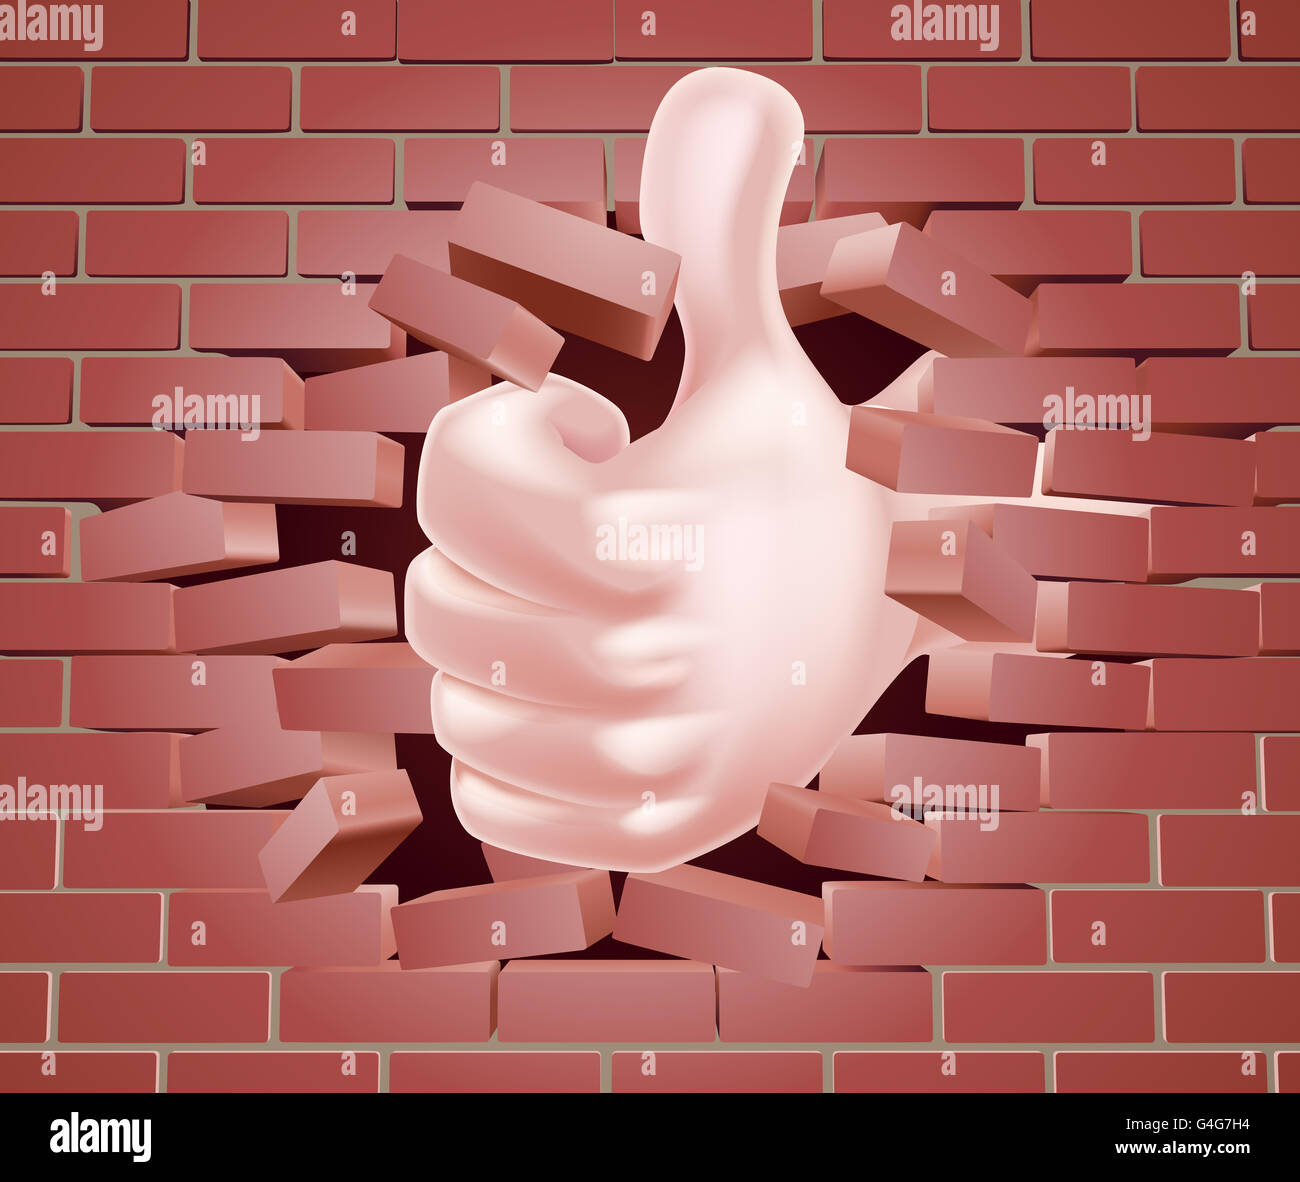 Conceptual illustration of a hand giving a thumbs up breaking through a wall of bricks Stock Photo